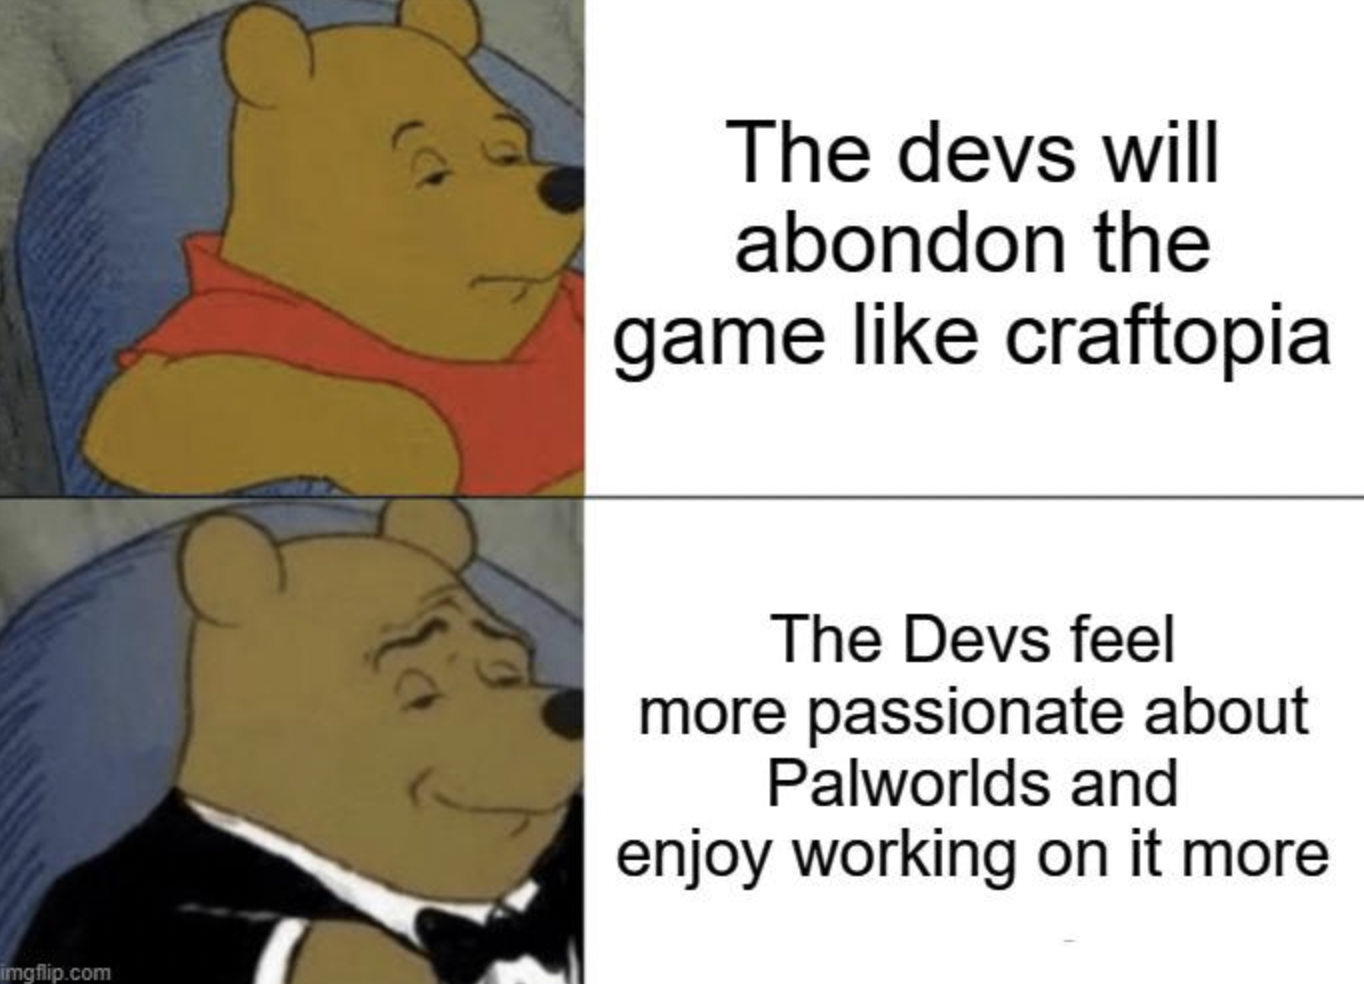 cartoon - imgflip.com The devs will abondon the game craftopia The Devs feel more passionate about Palworlds and enjoy working on it more